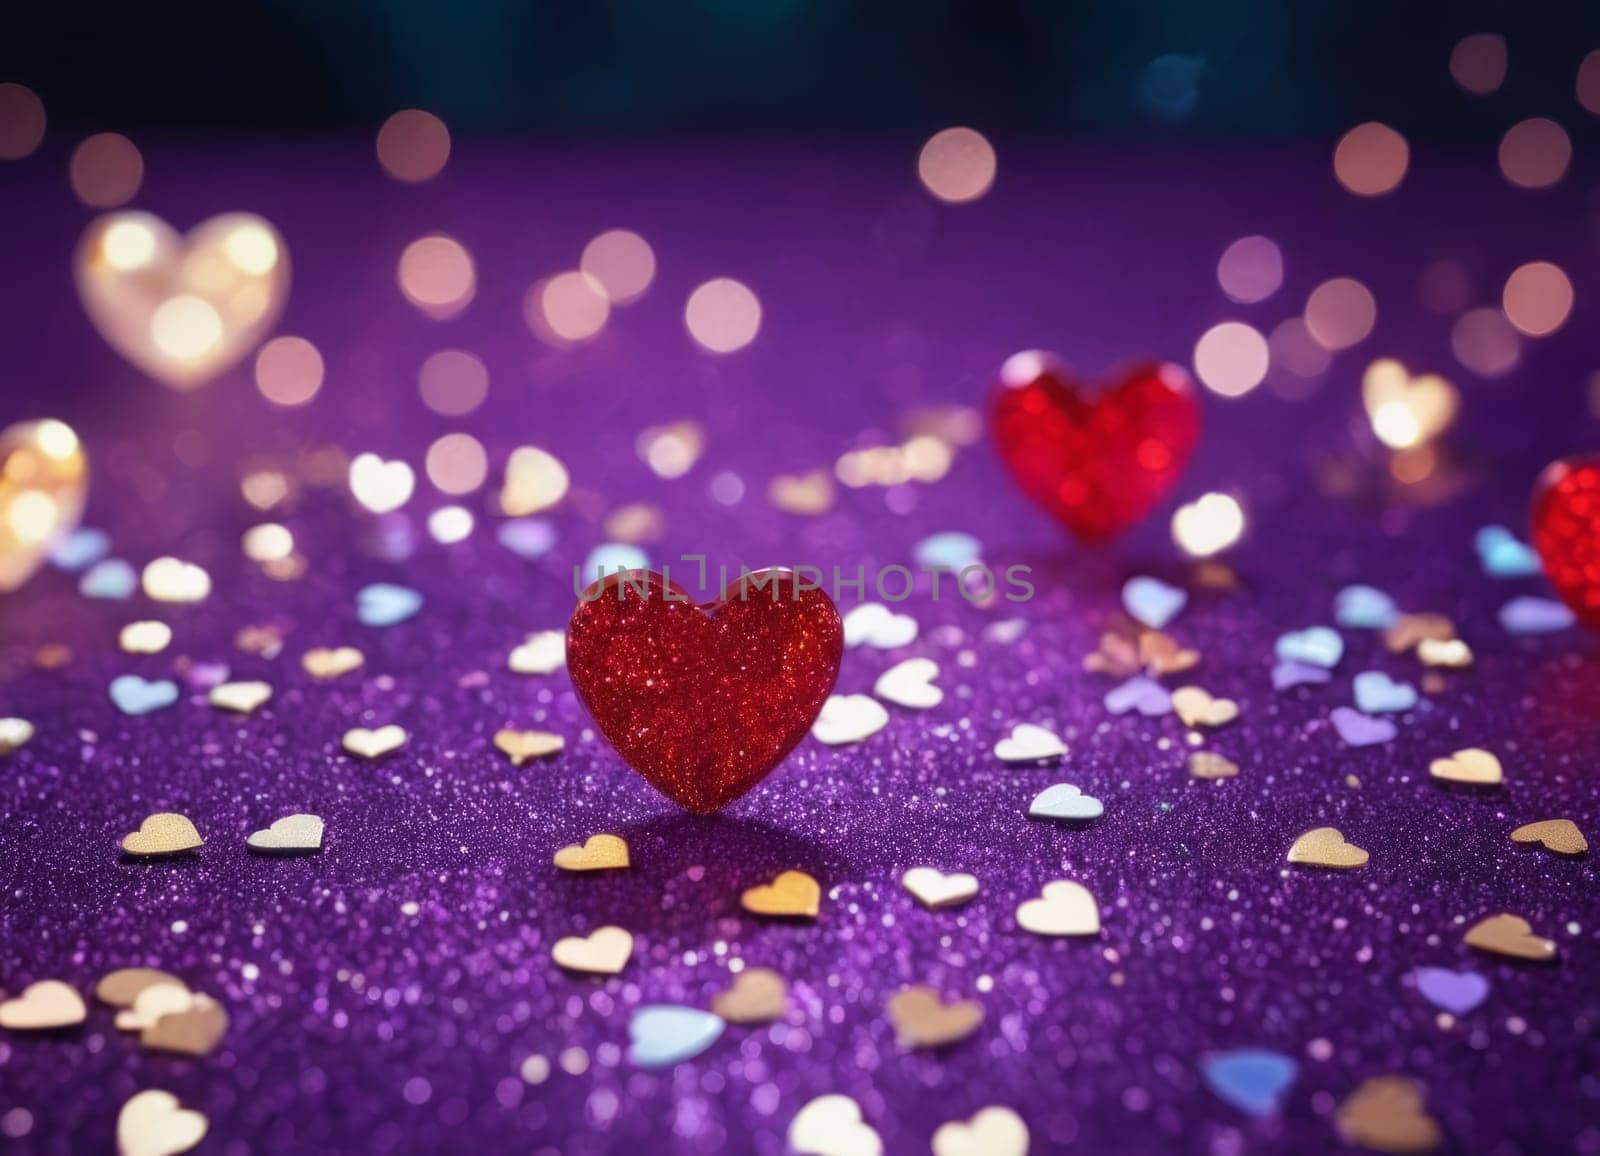 Hearts shine among the sparkling purple color. Valentine's Day by Andre1ns